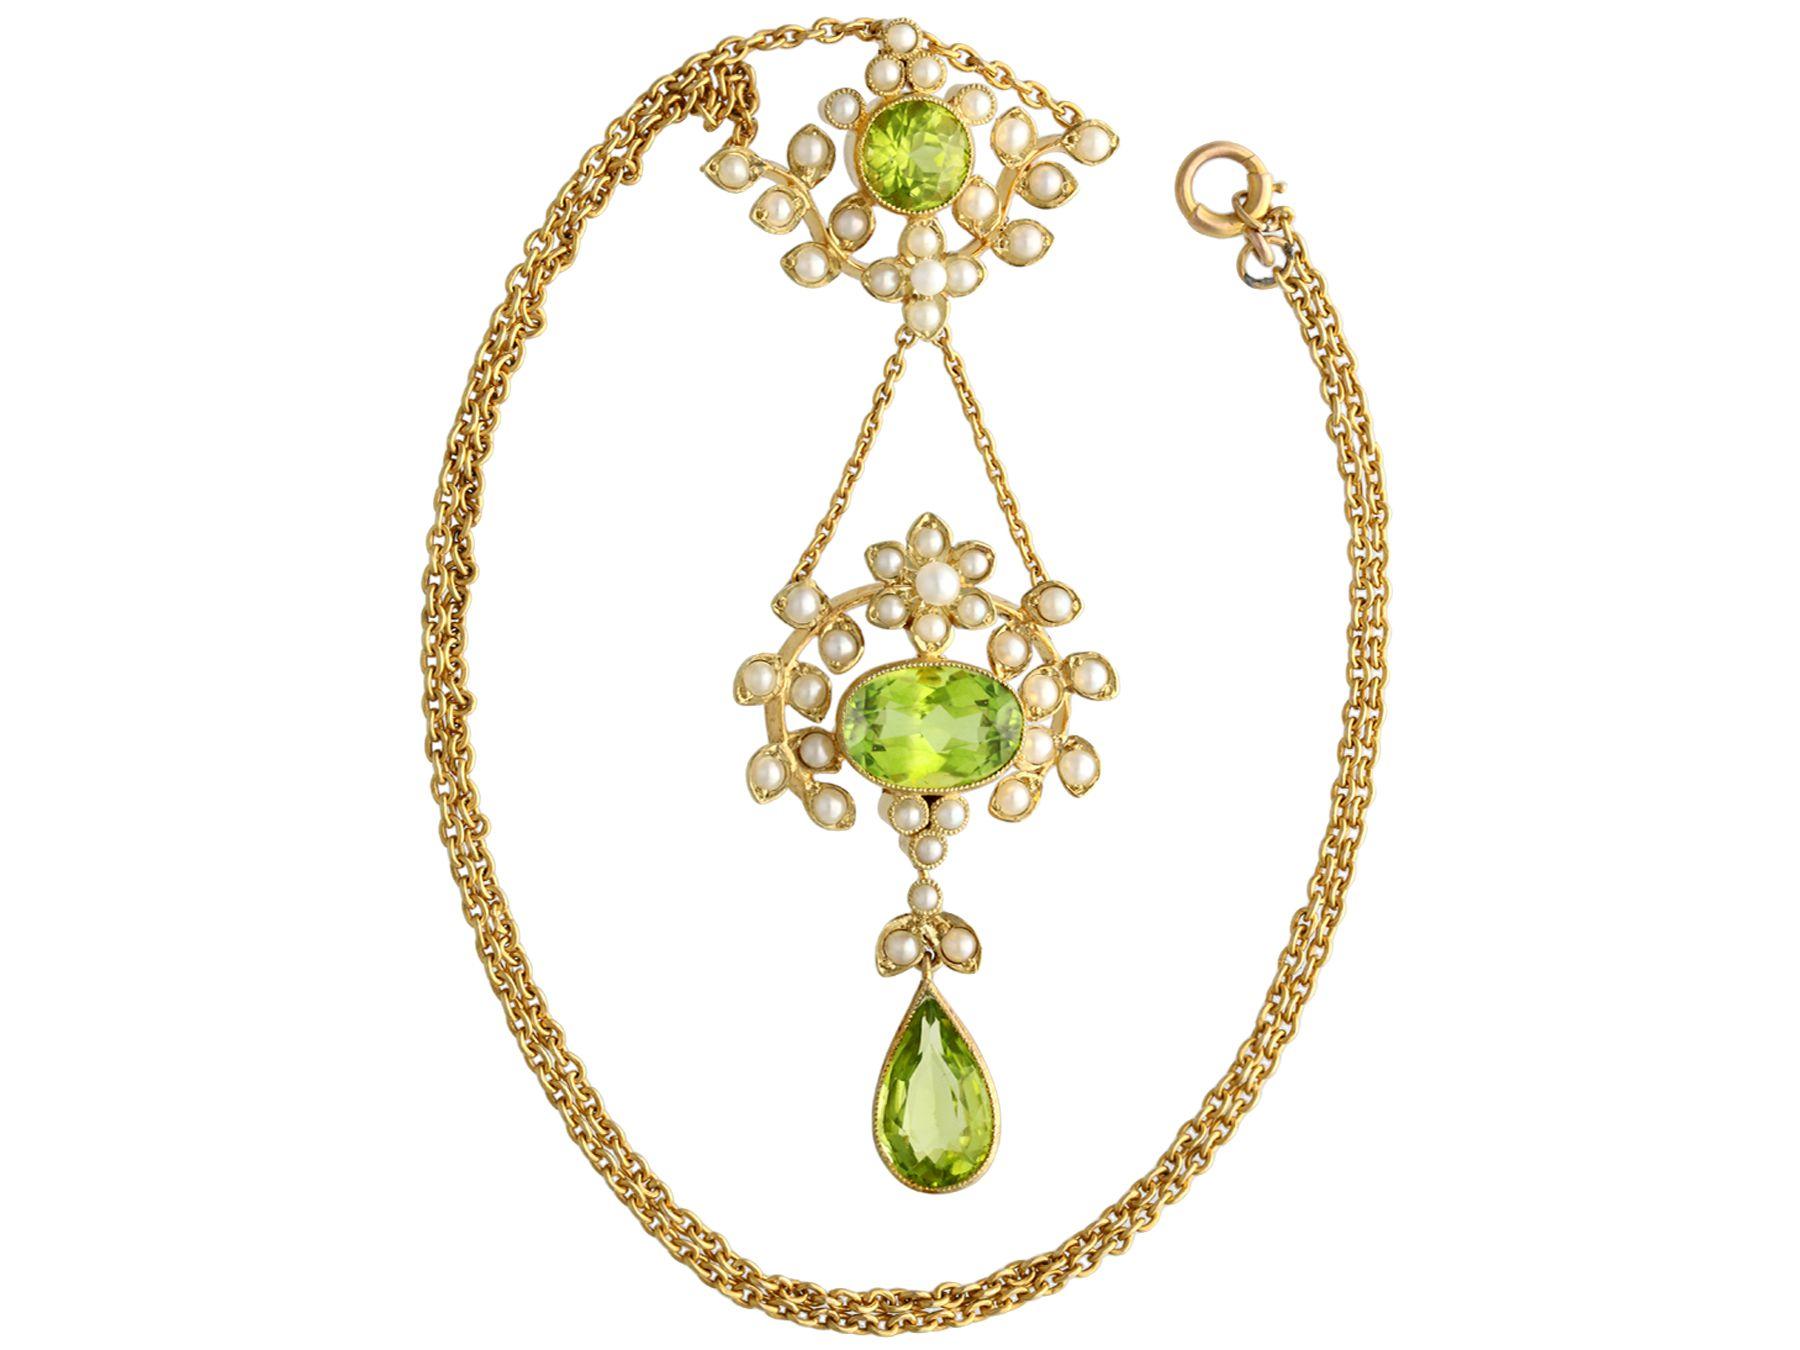 A stunning, fine and impressive antique 3.43 carat peridot and seed pearl, 15 karat yellow gold necklace; part of our diverse antique jewelry collections.

This stunning antique peridot and pearl necklace has been crafted in 15k yellow gold.

The